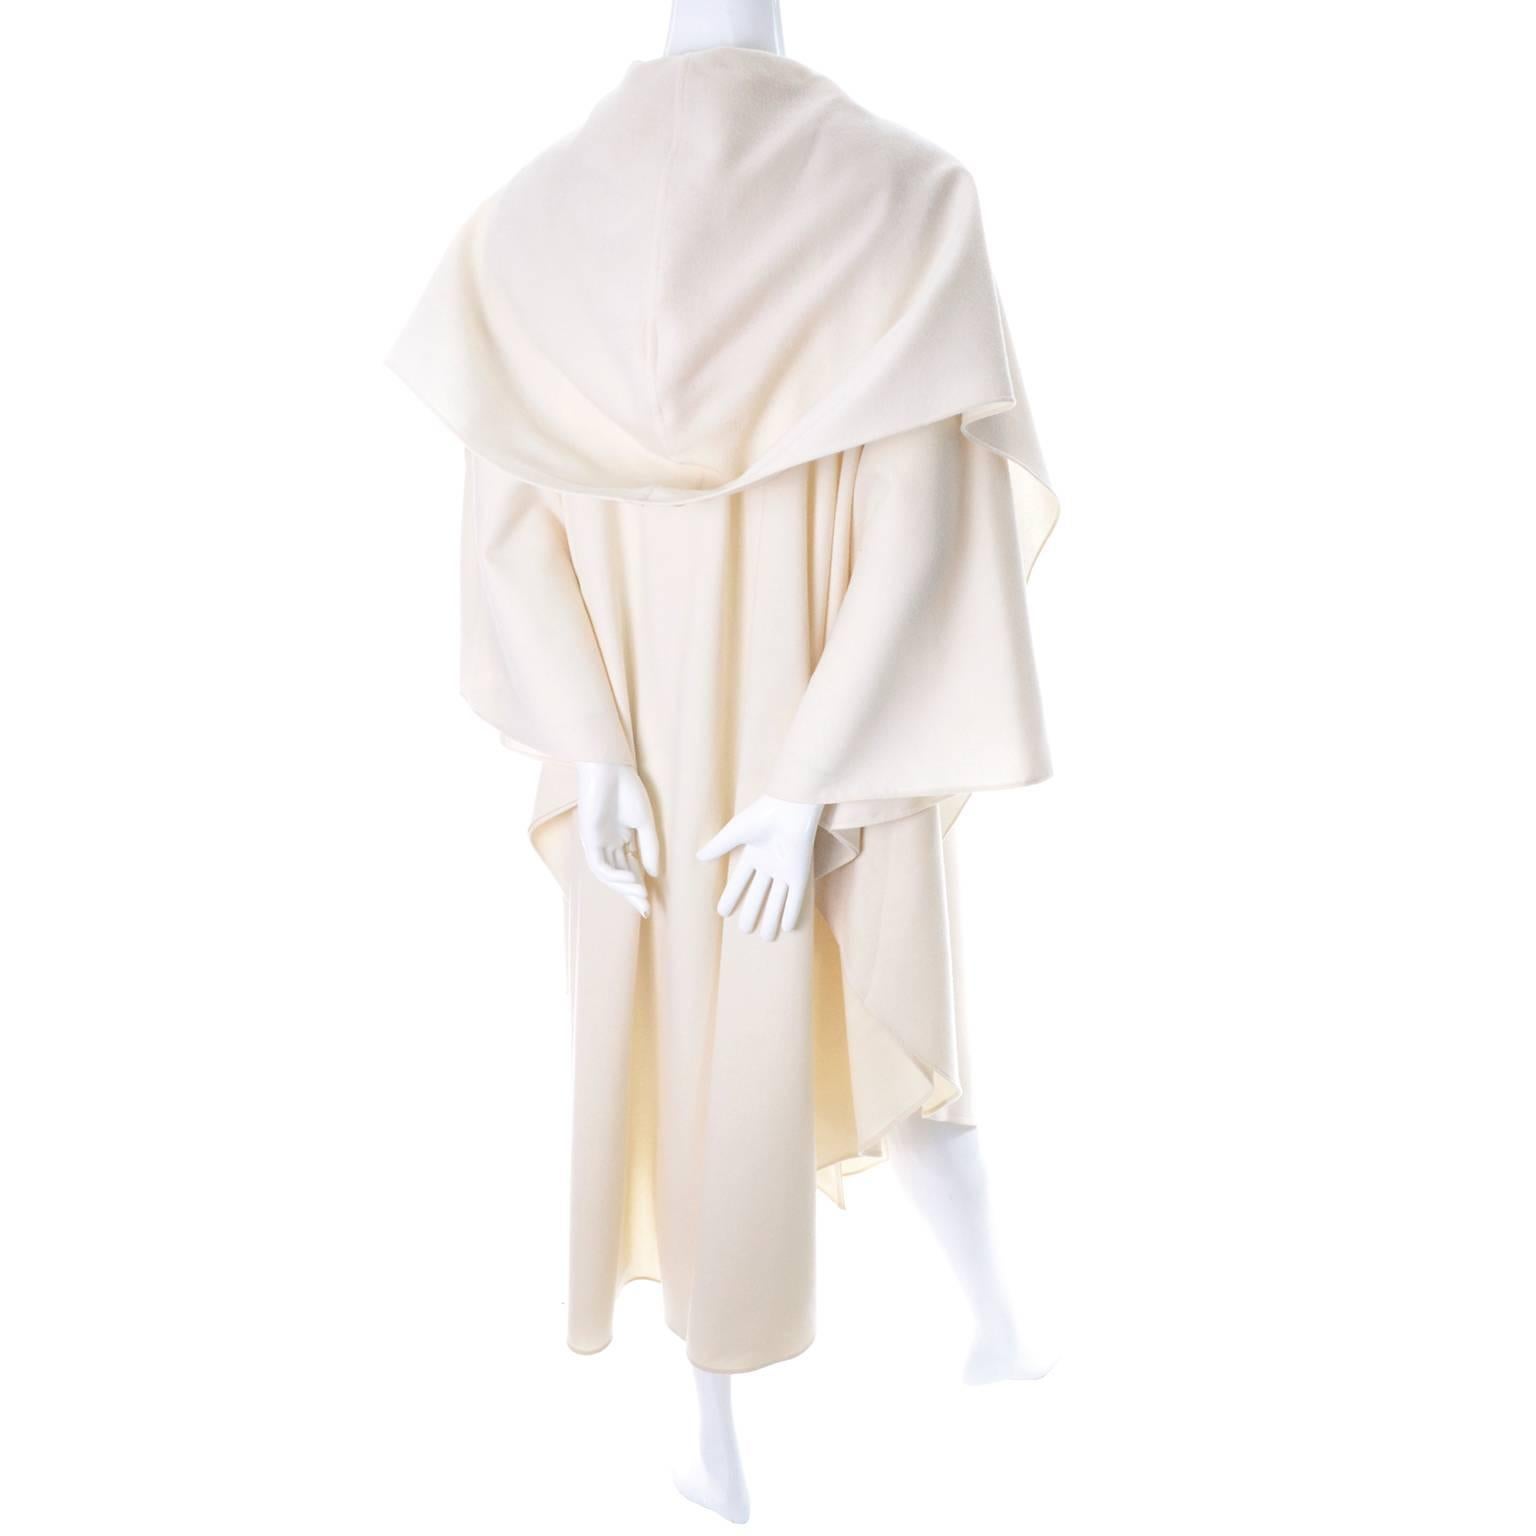 Winter White Wool Designer Yeohlee Hooded Cape Cloak One Size As New 1